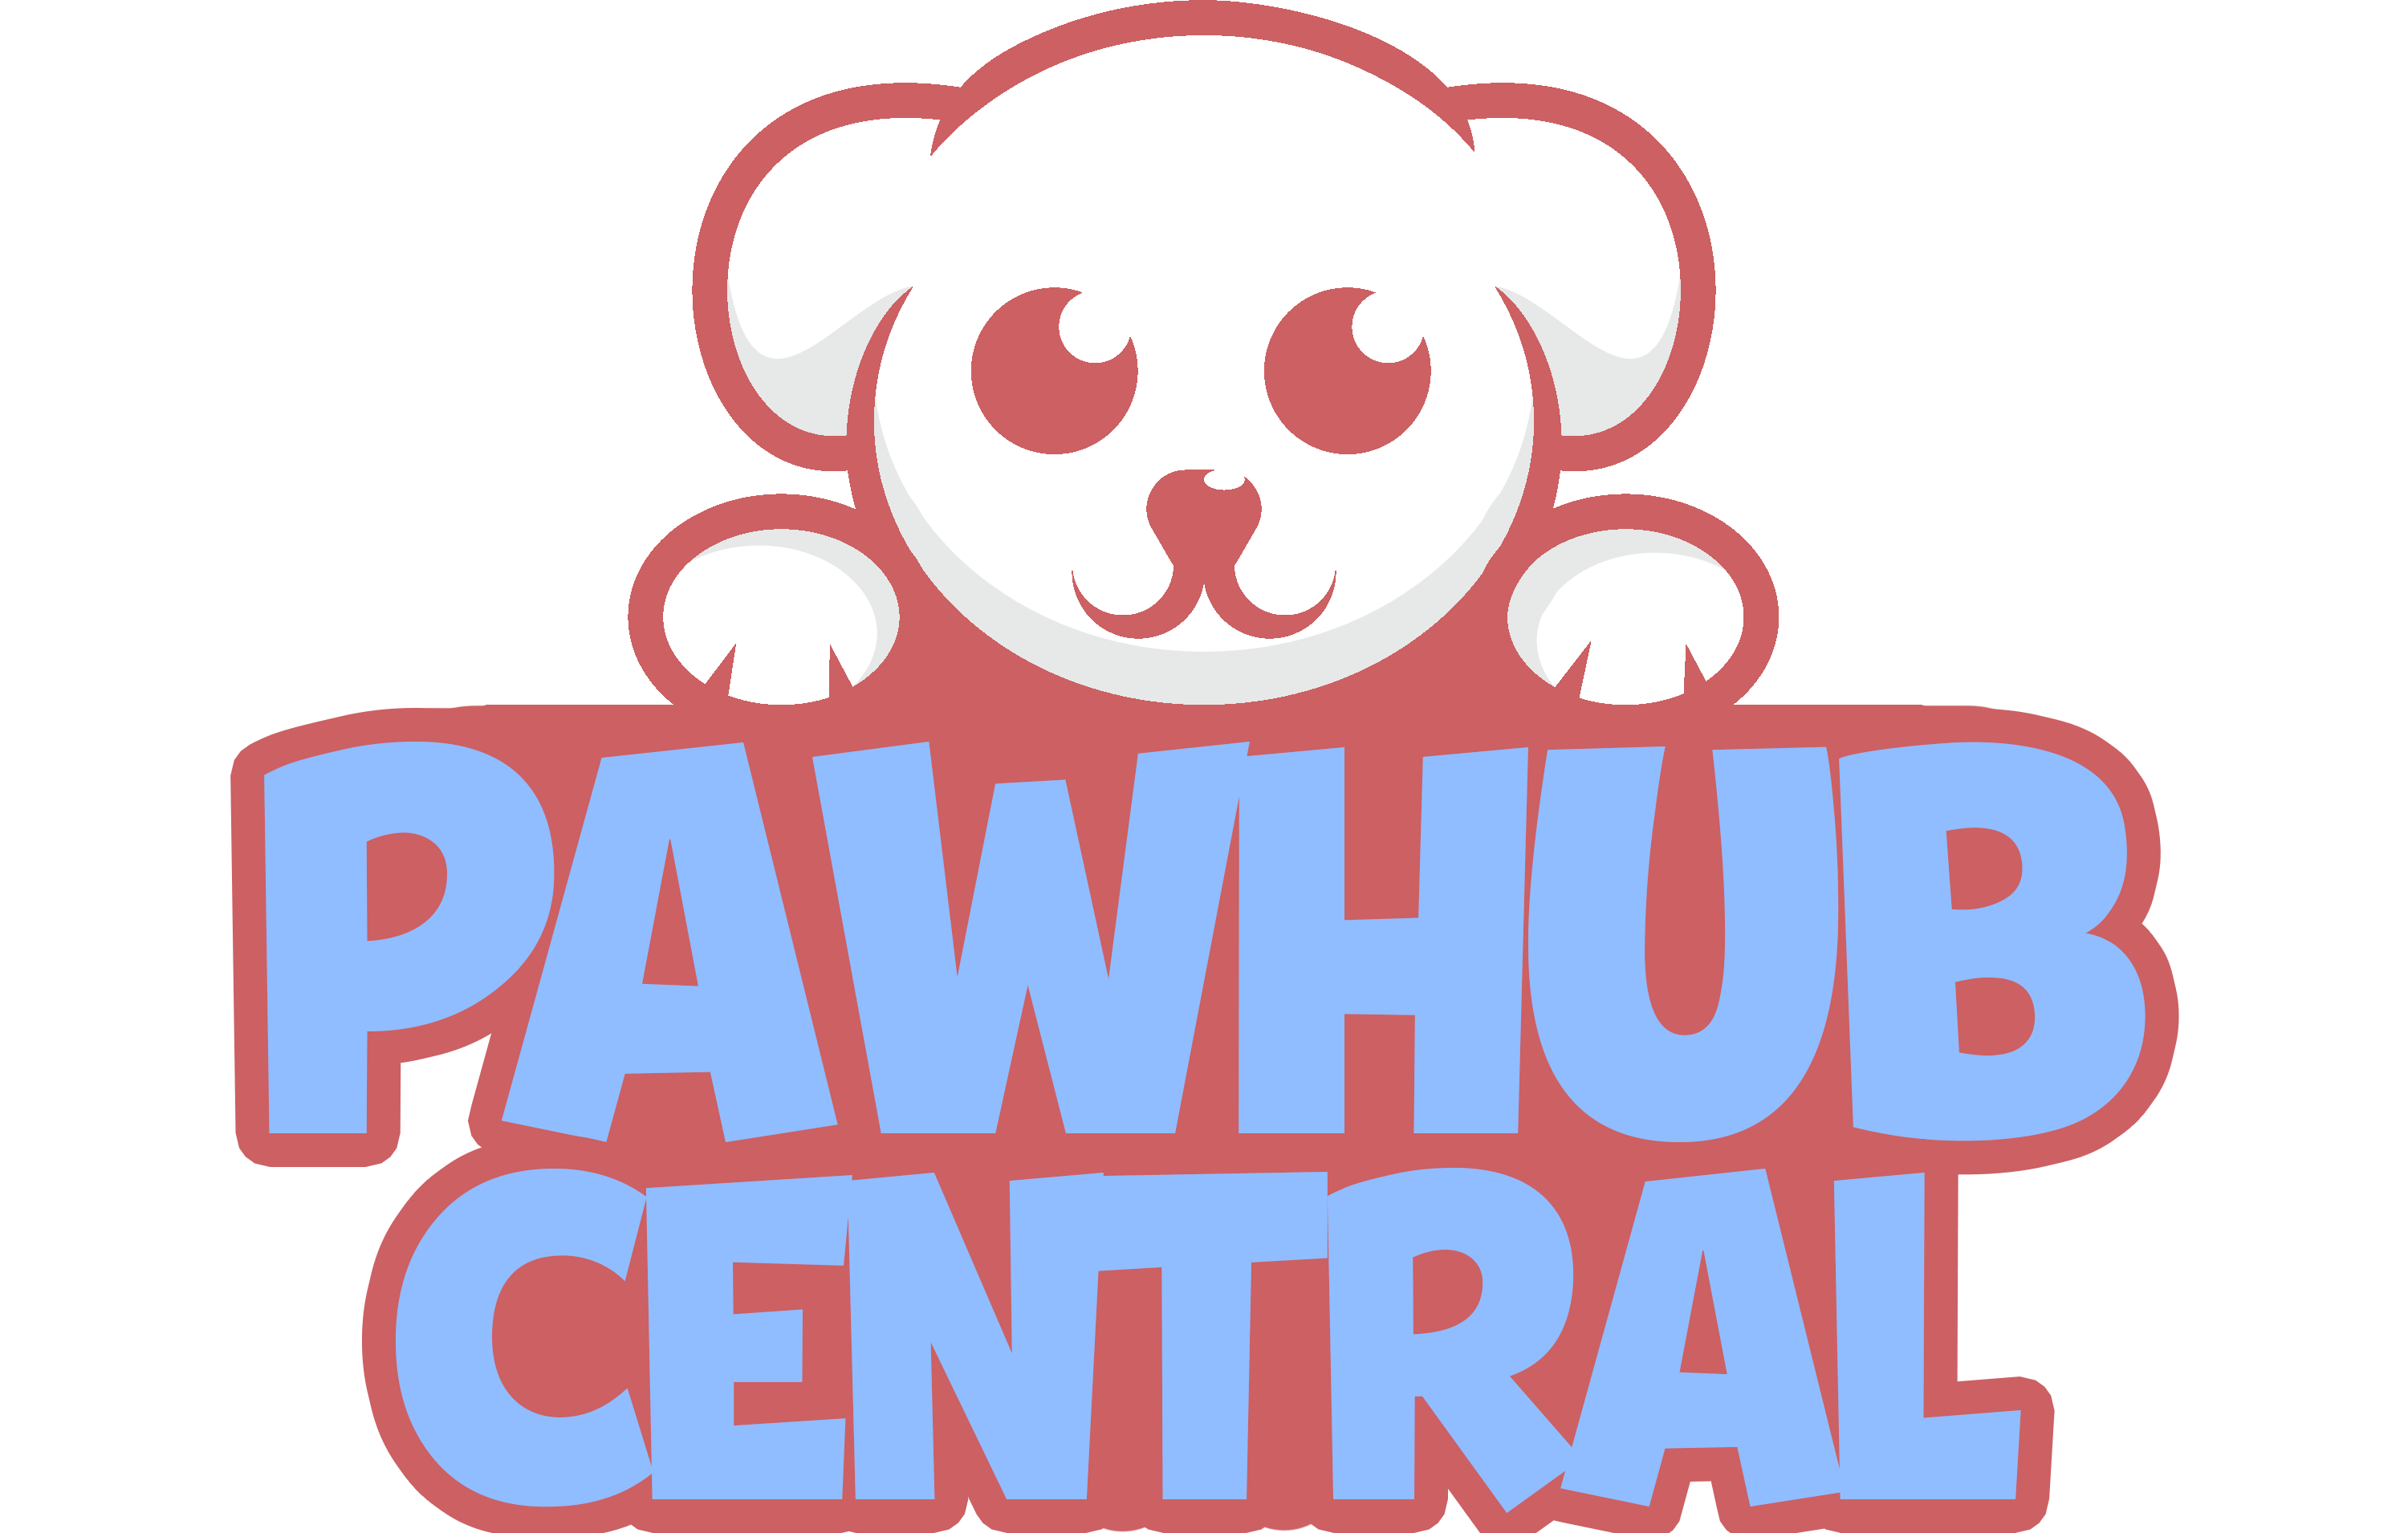 PawHubCentral